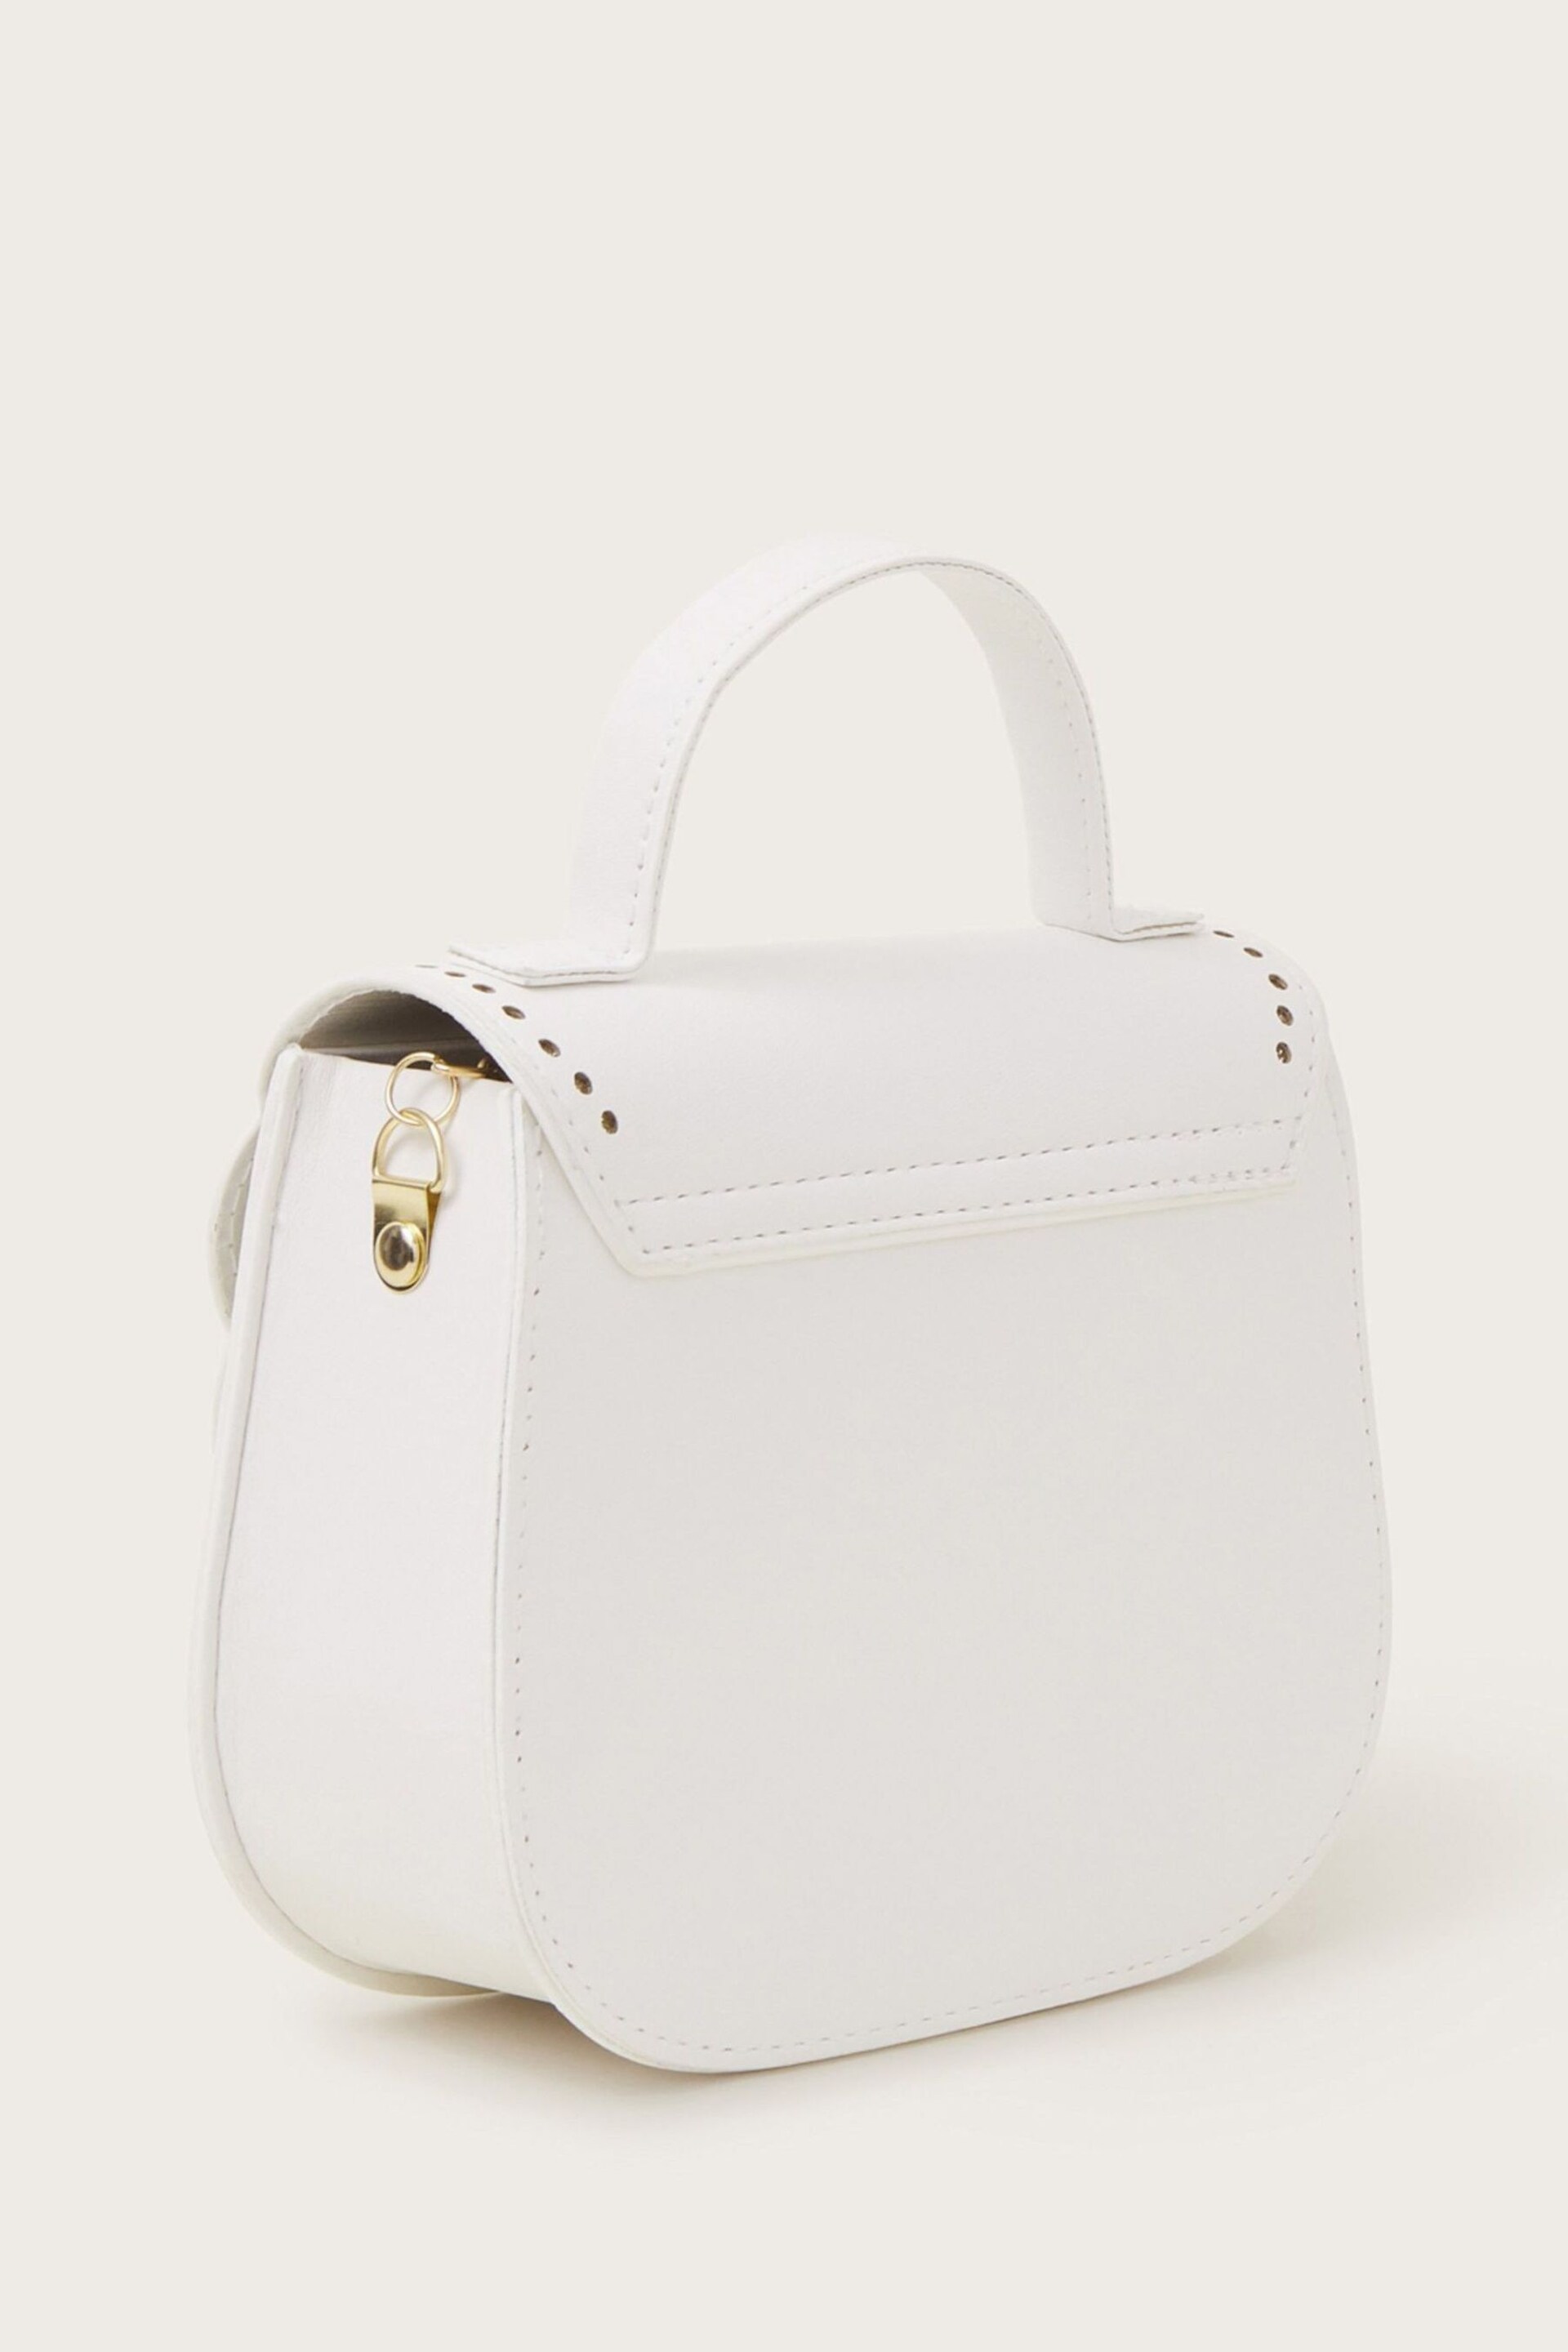 Monsoon White Scallop Butterfly Bag - Image 2 of 3